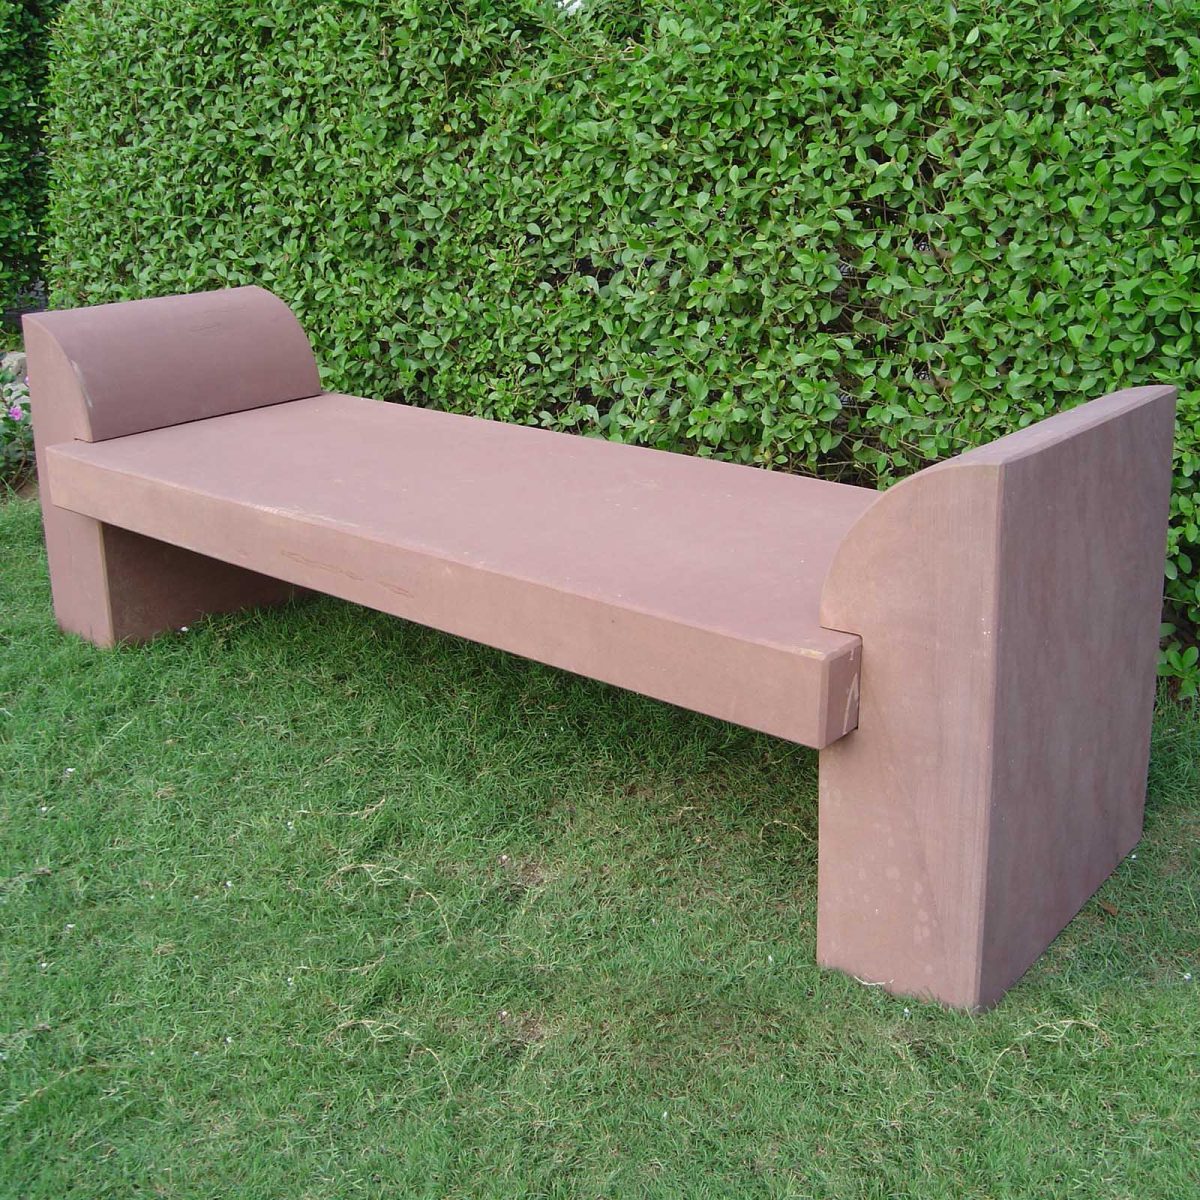 Stone Garden Bench Outdoor Articles For Sale From Indian